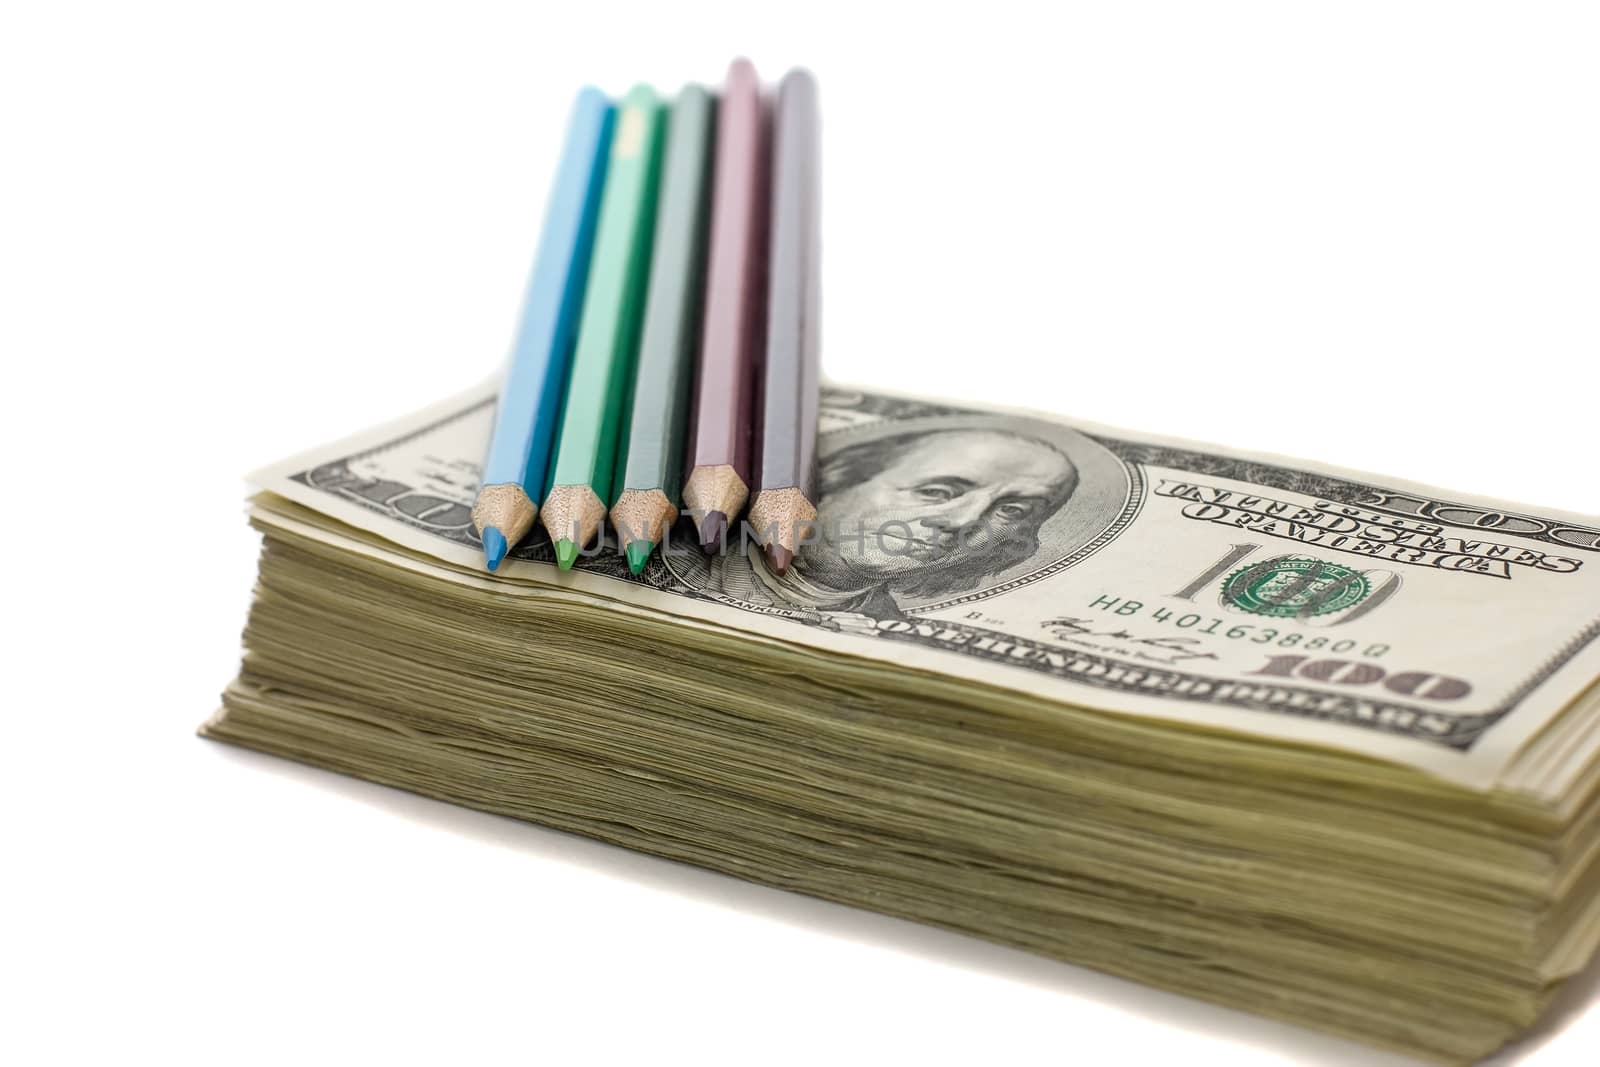 Production of counterfeit dollars, one hundred American dollar to make counterfeit money is forbidden! Punishment - prison Creating fake dollar pencils